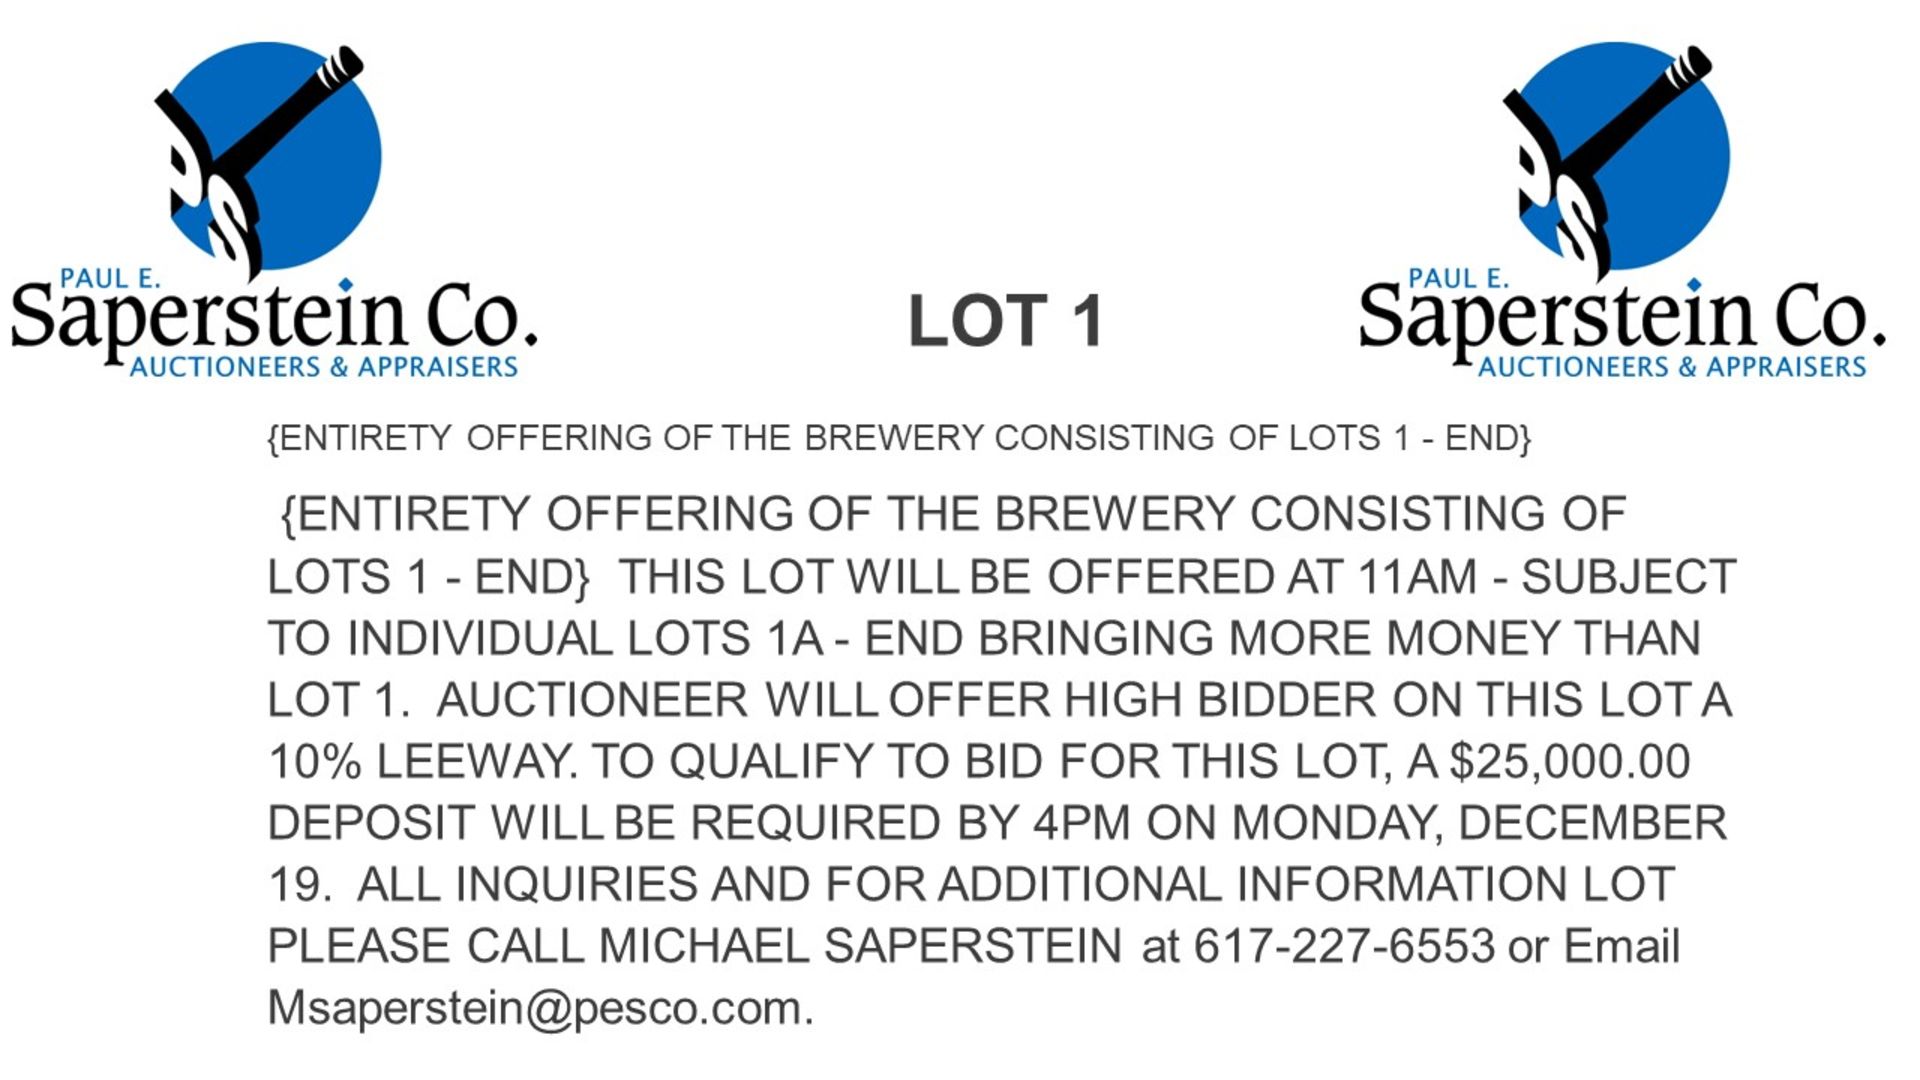 ENTIRETY BID - ALL OF BRATO BREWERY ASSETS LOTS 1A - END - SEE DESCRIPTION FOR TERMS